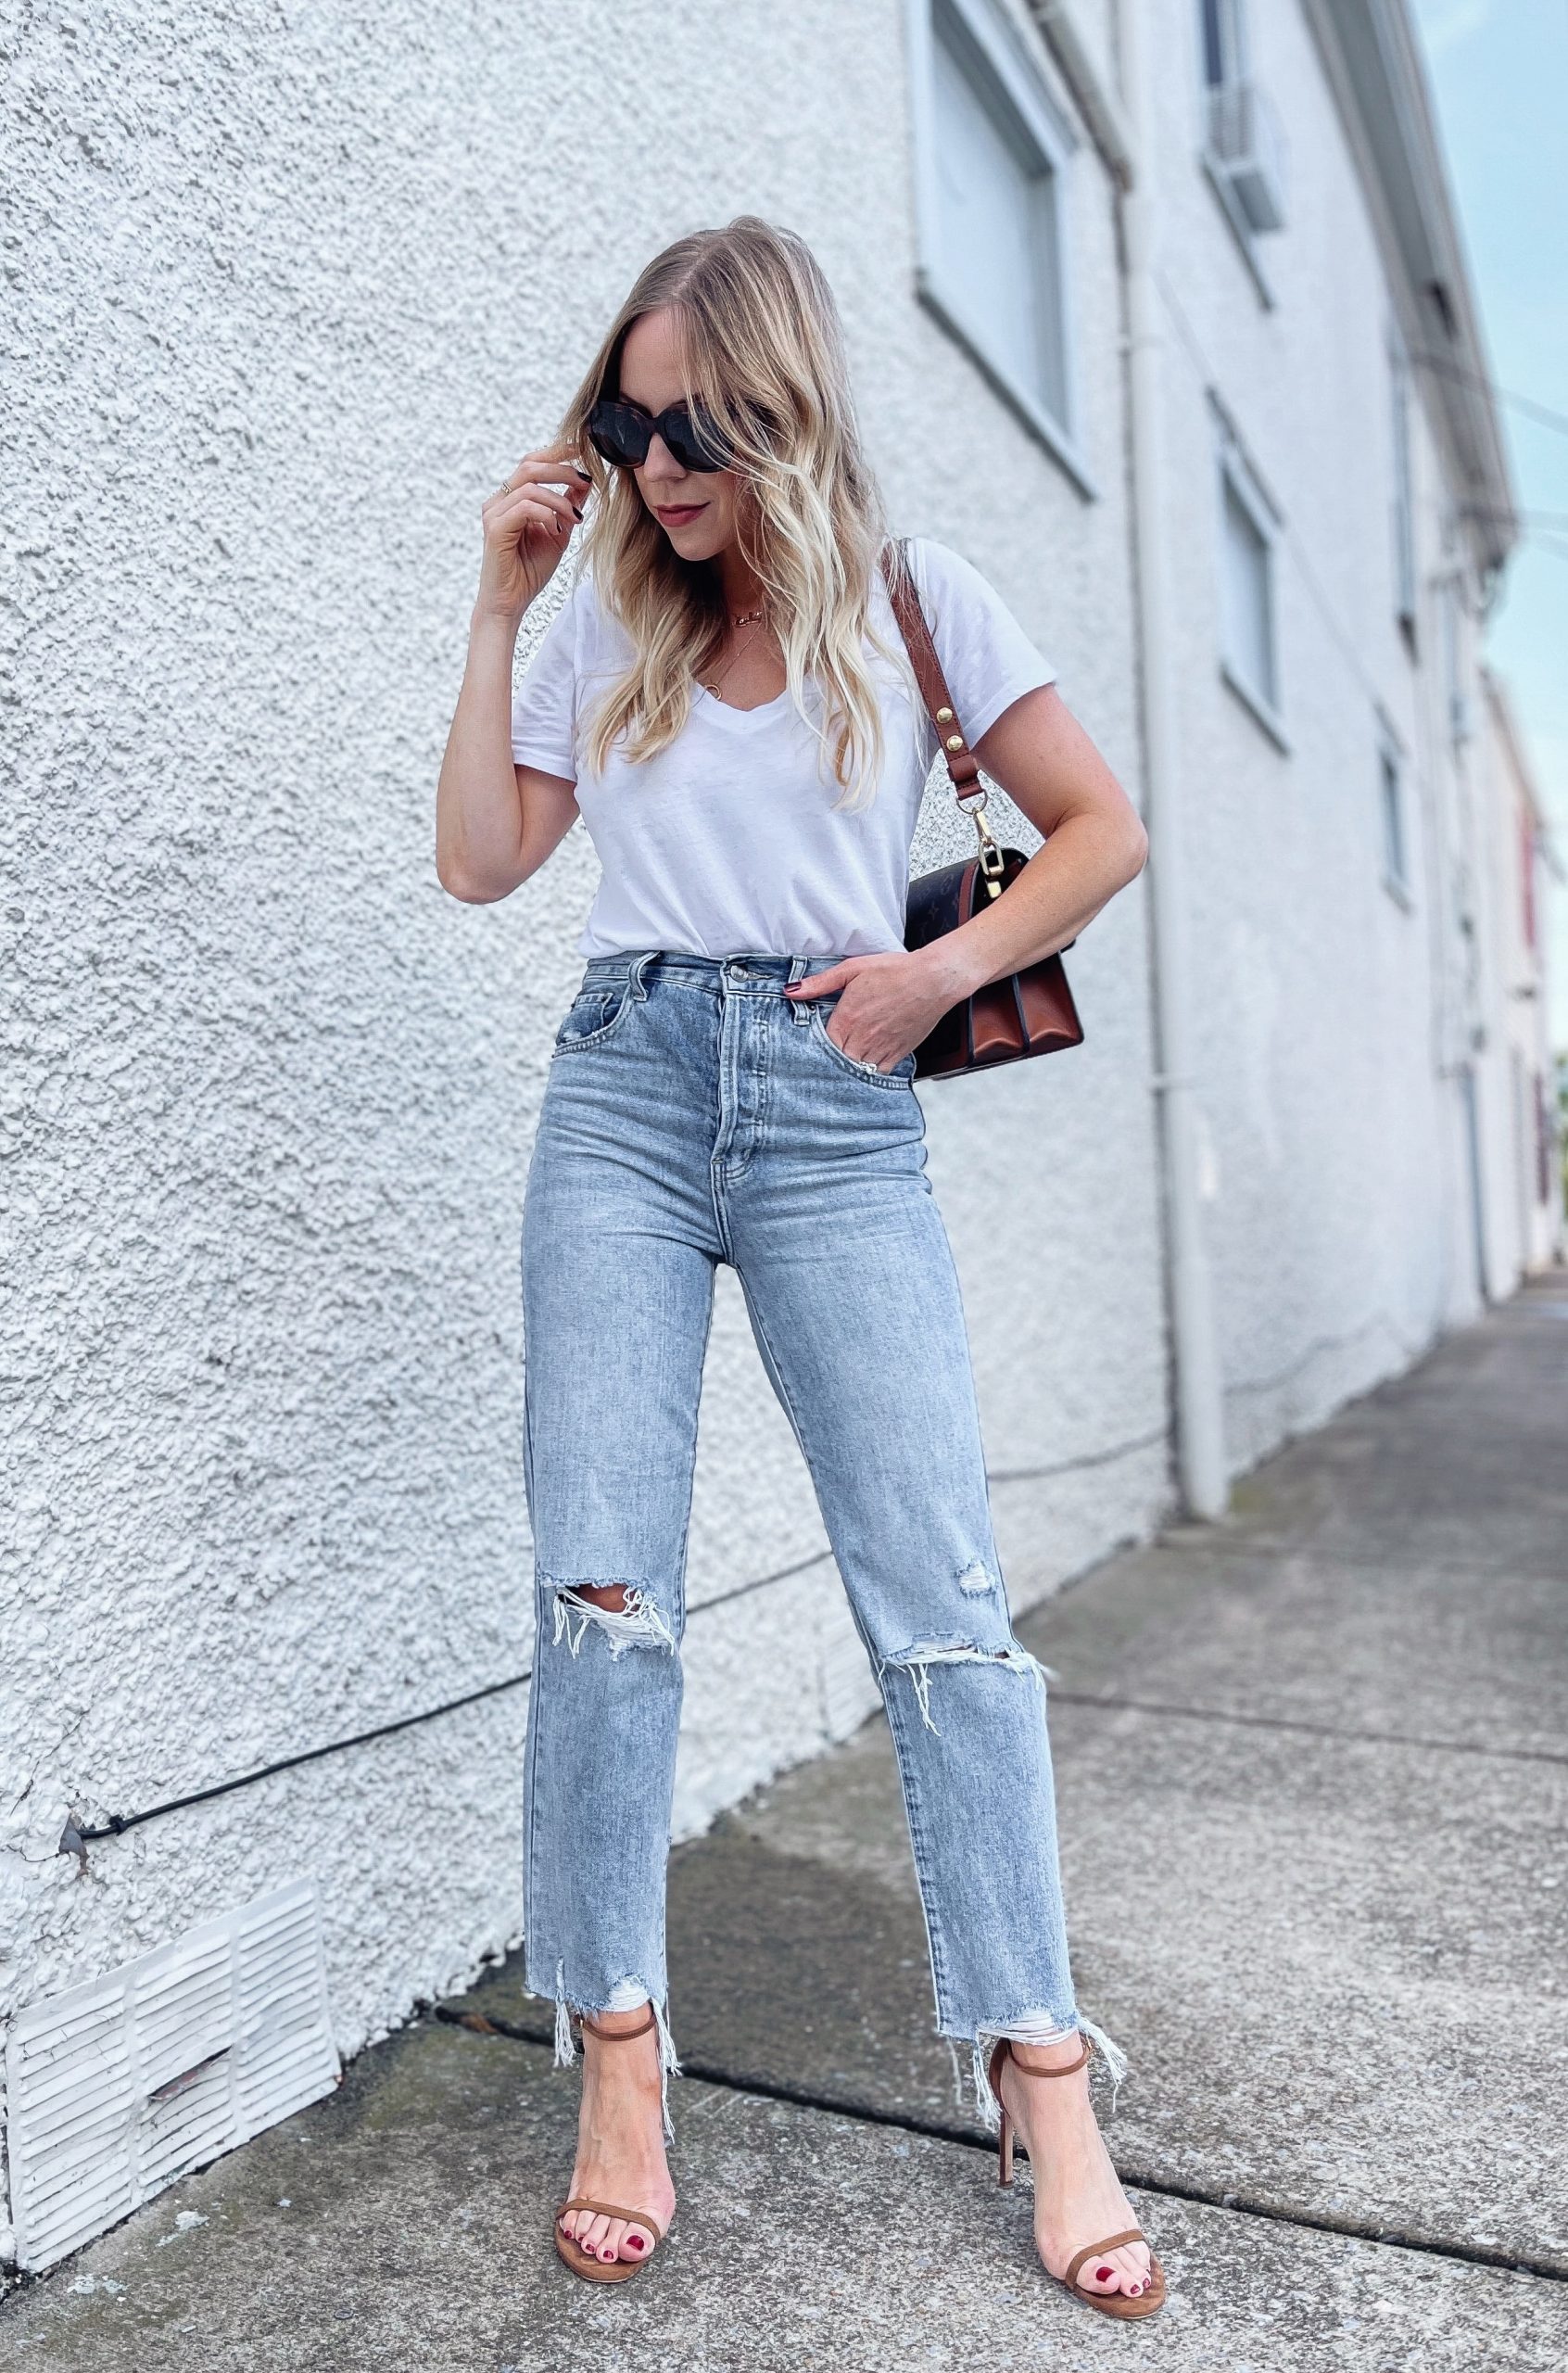 The Best Shoes to Wear With Wide Cuff Jeans - Meagan's Moda